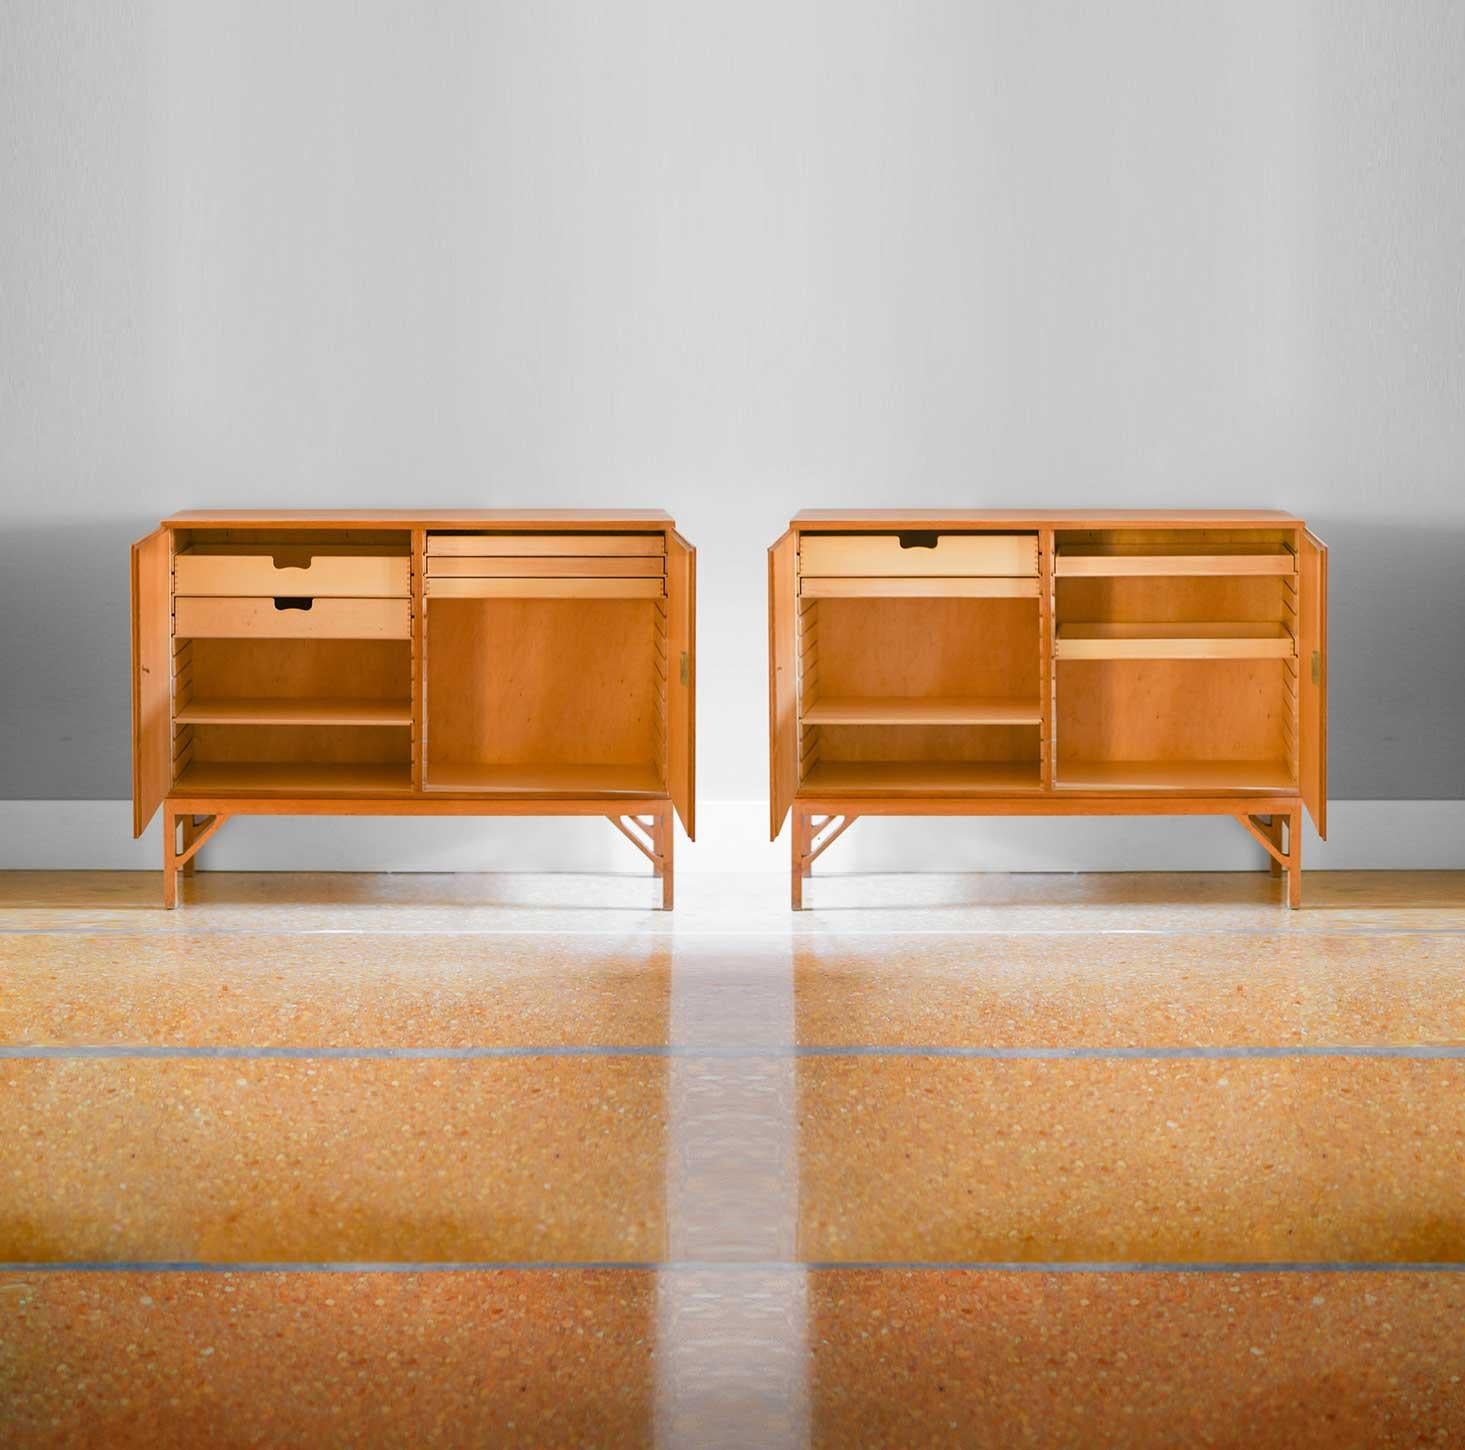 Pair of consoles China cabinet - Model, 232 by Borge Mogensen Prod. FDB Mobler.
Made of oak wood with 1960s brass details.
Container unit with customizable internal shelves and drawers.